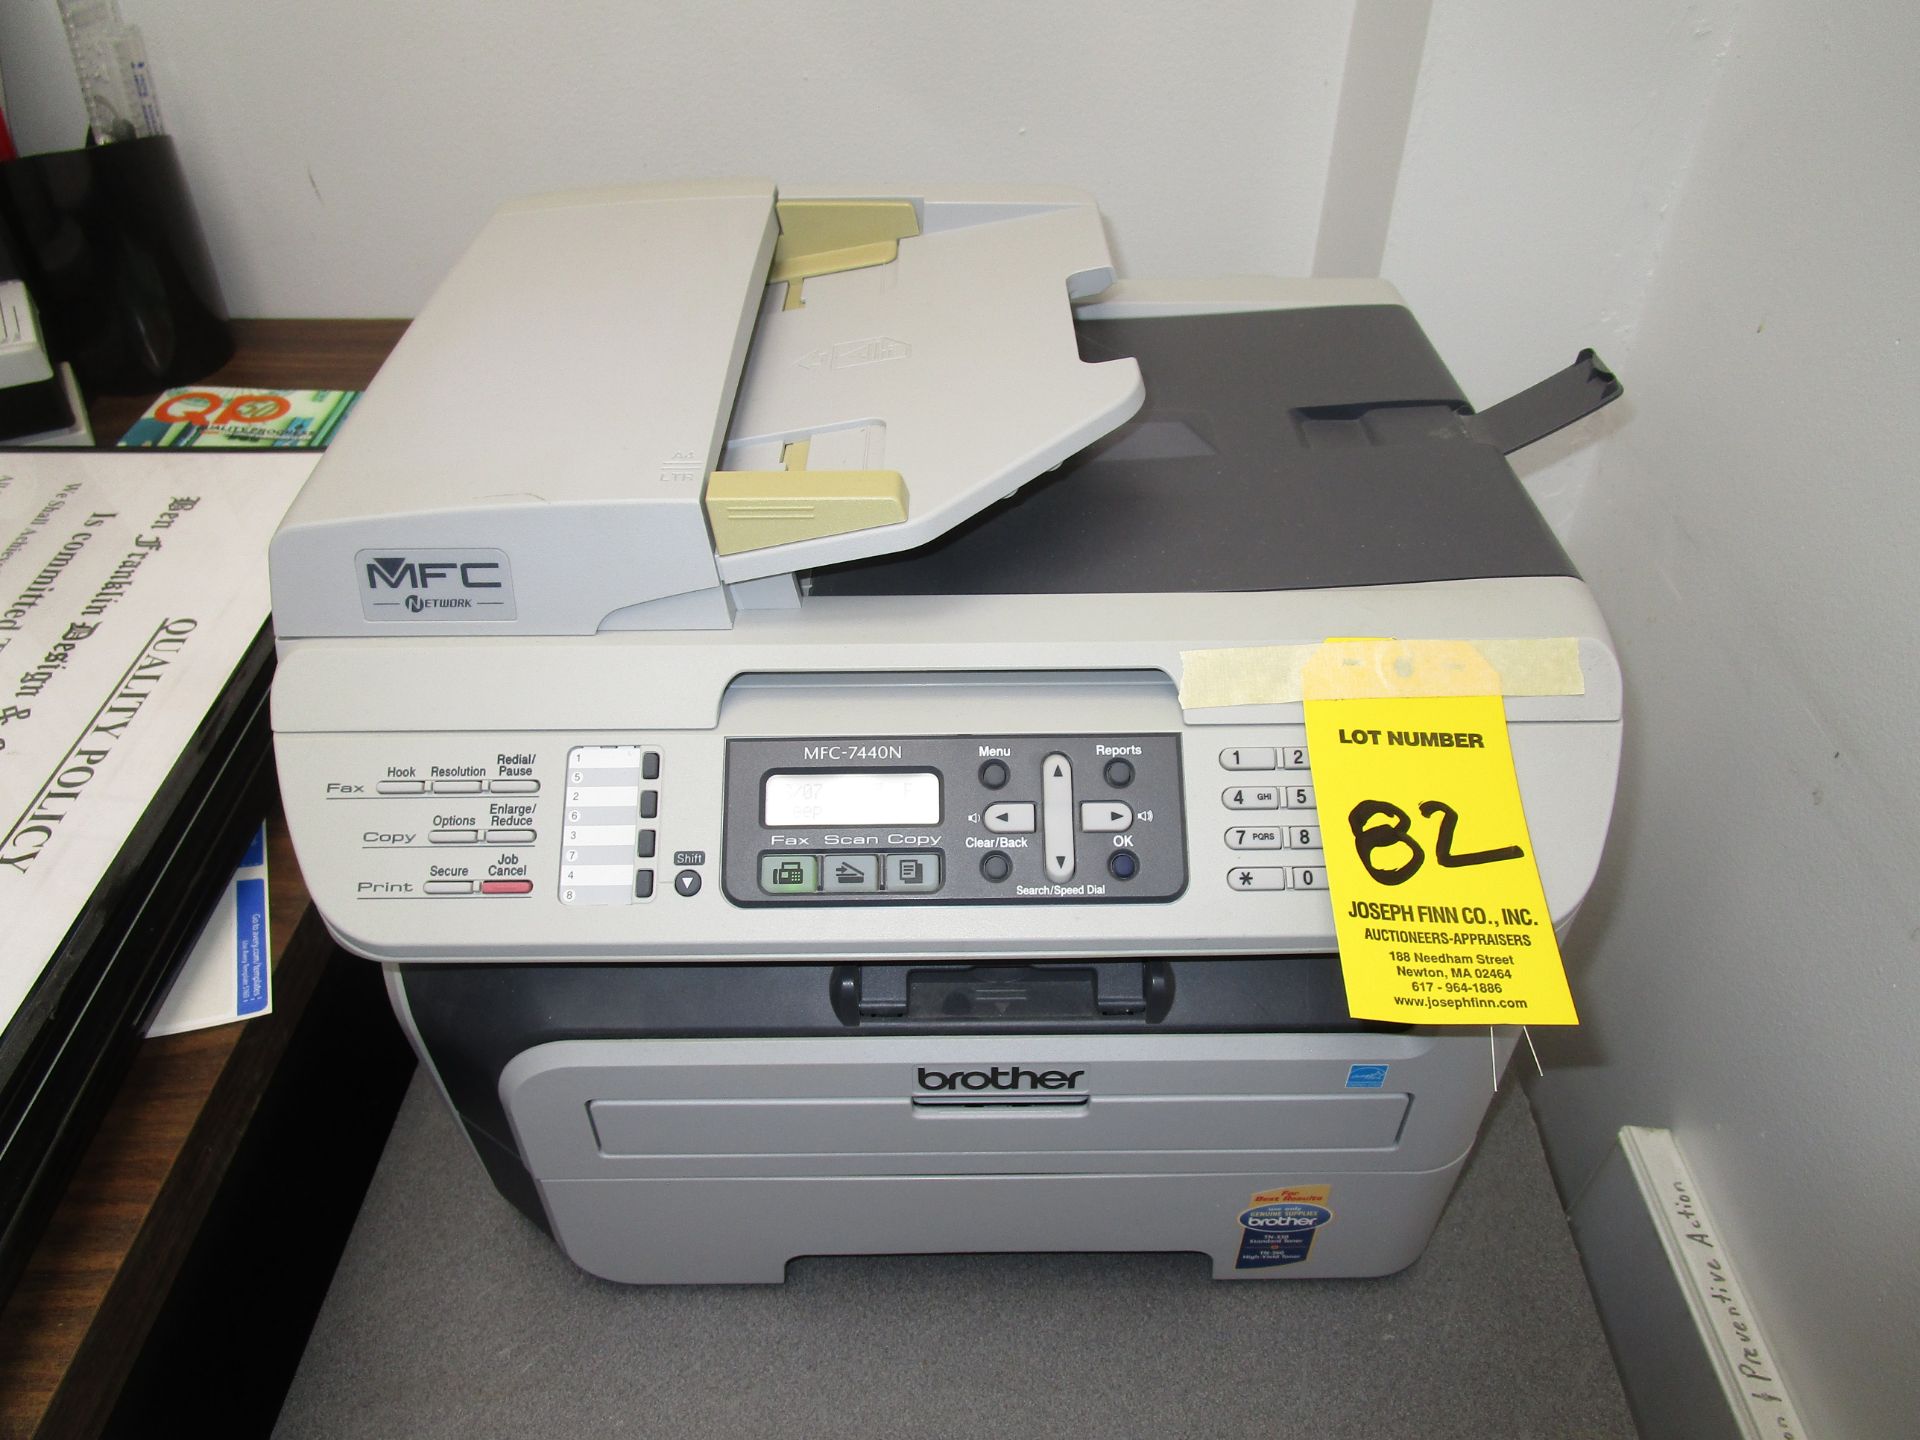 (1) Brother MFC-7440N Fax/Scan/Copier